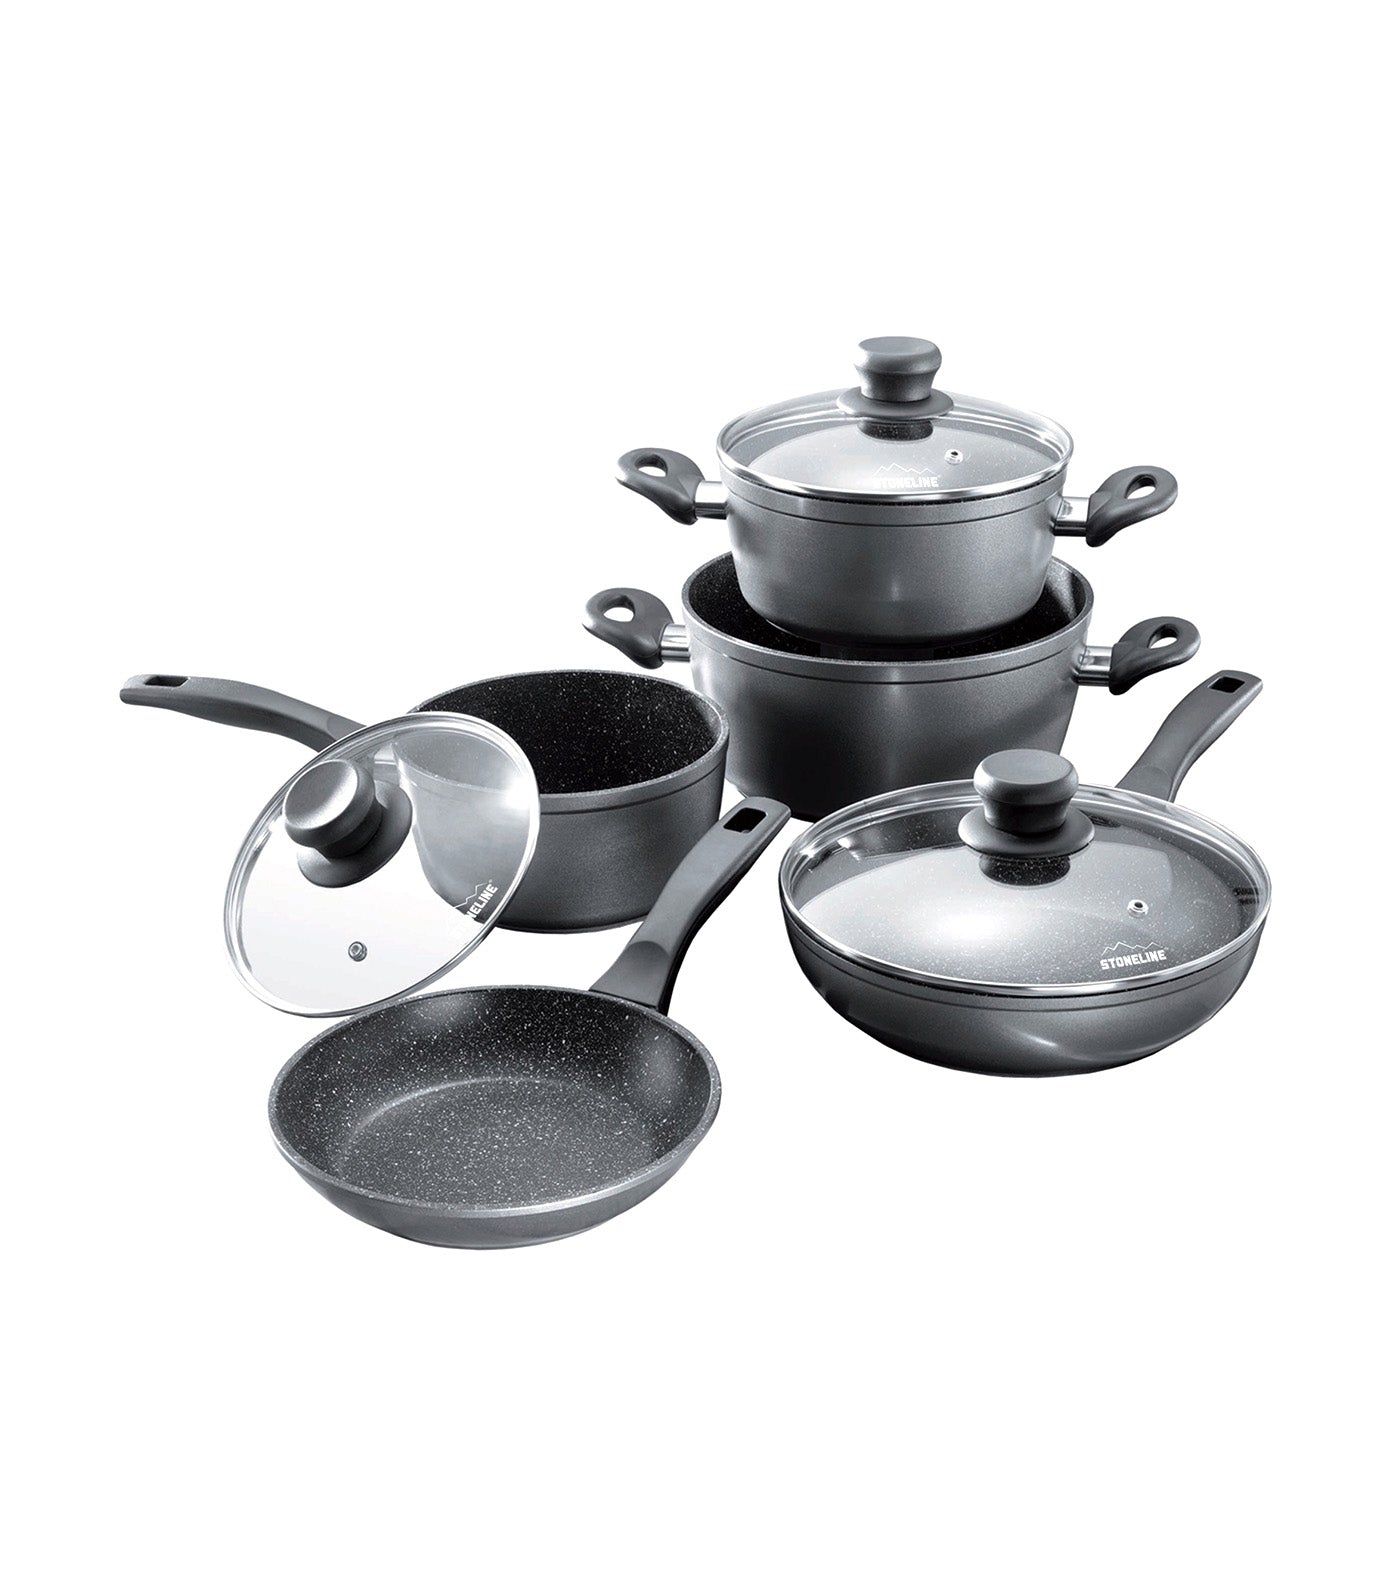 stoneline cookware set of 8 with glass lids